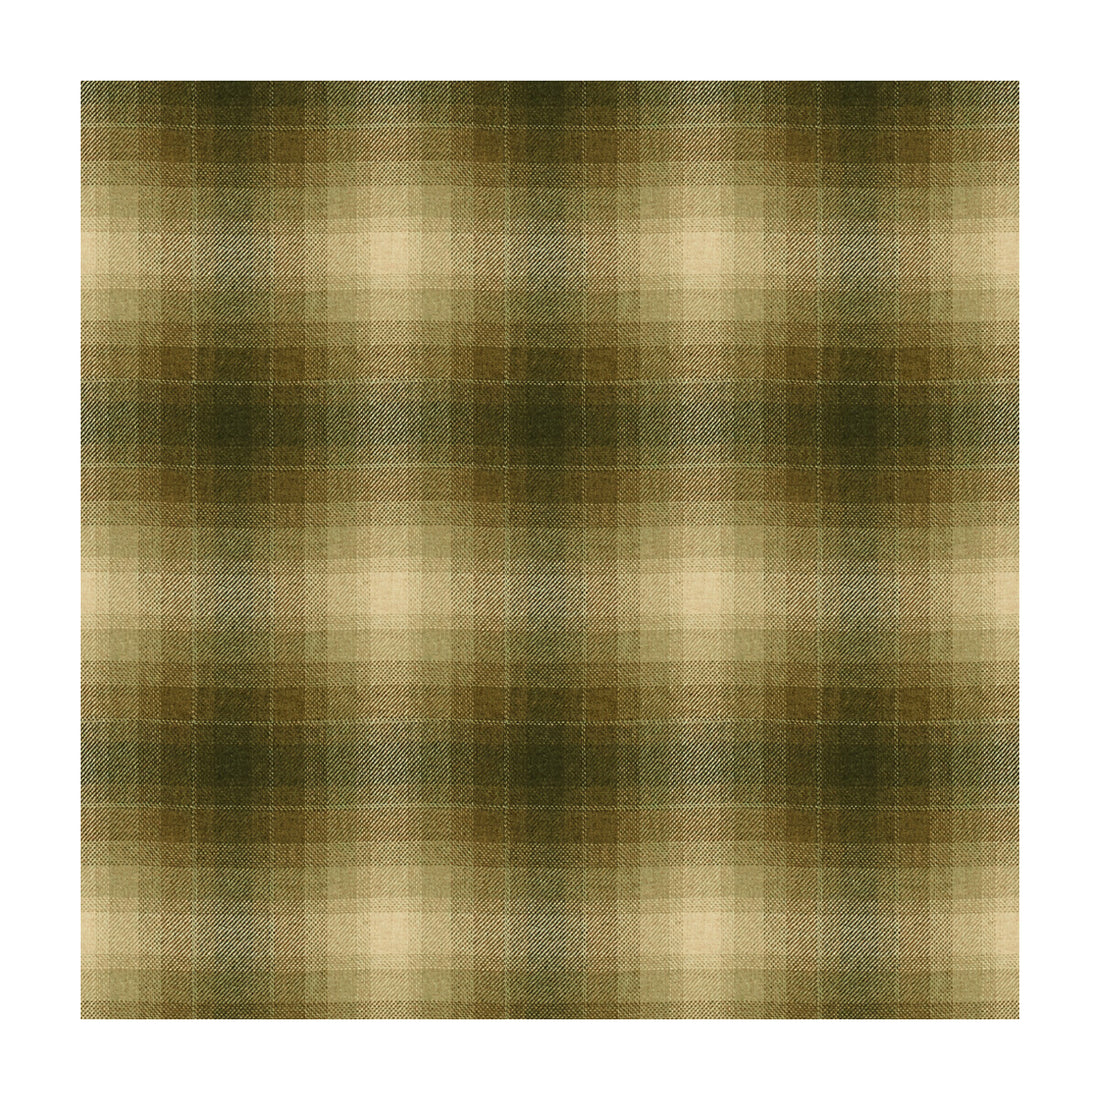 Toboggan Plaid fabric in hemlock color - pattern 33912.1630.0 - by Kravet Couture in the Barbara Barry Chalet collection